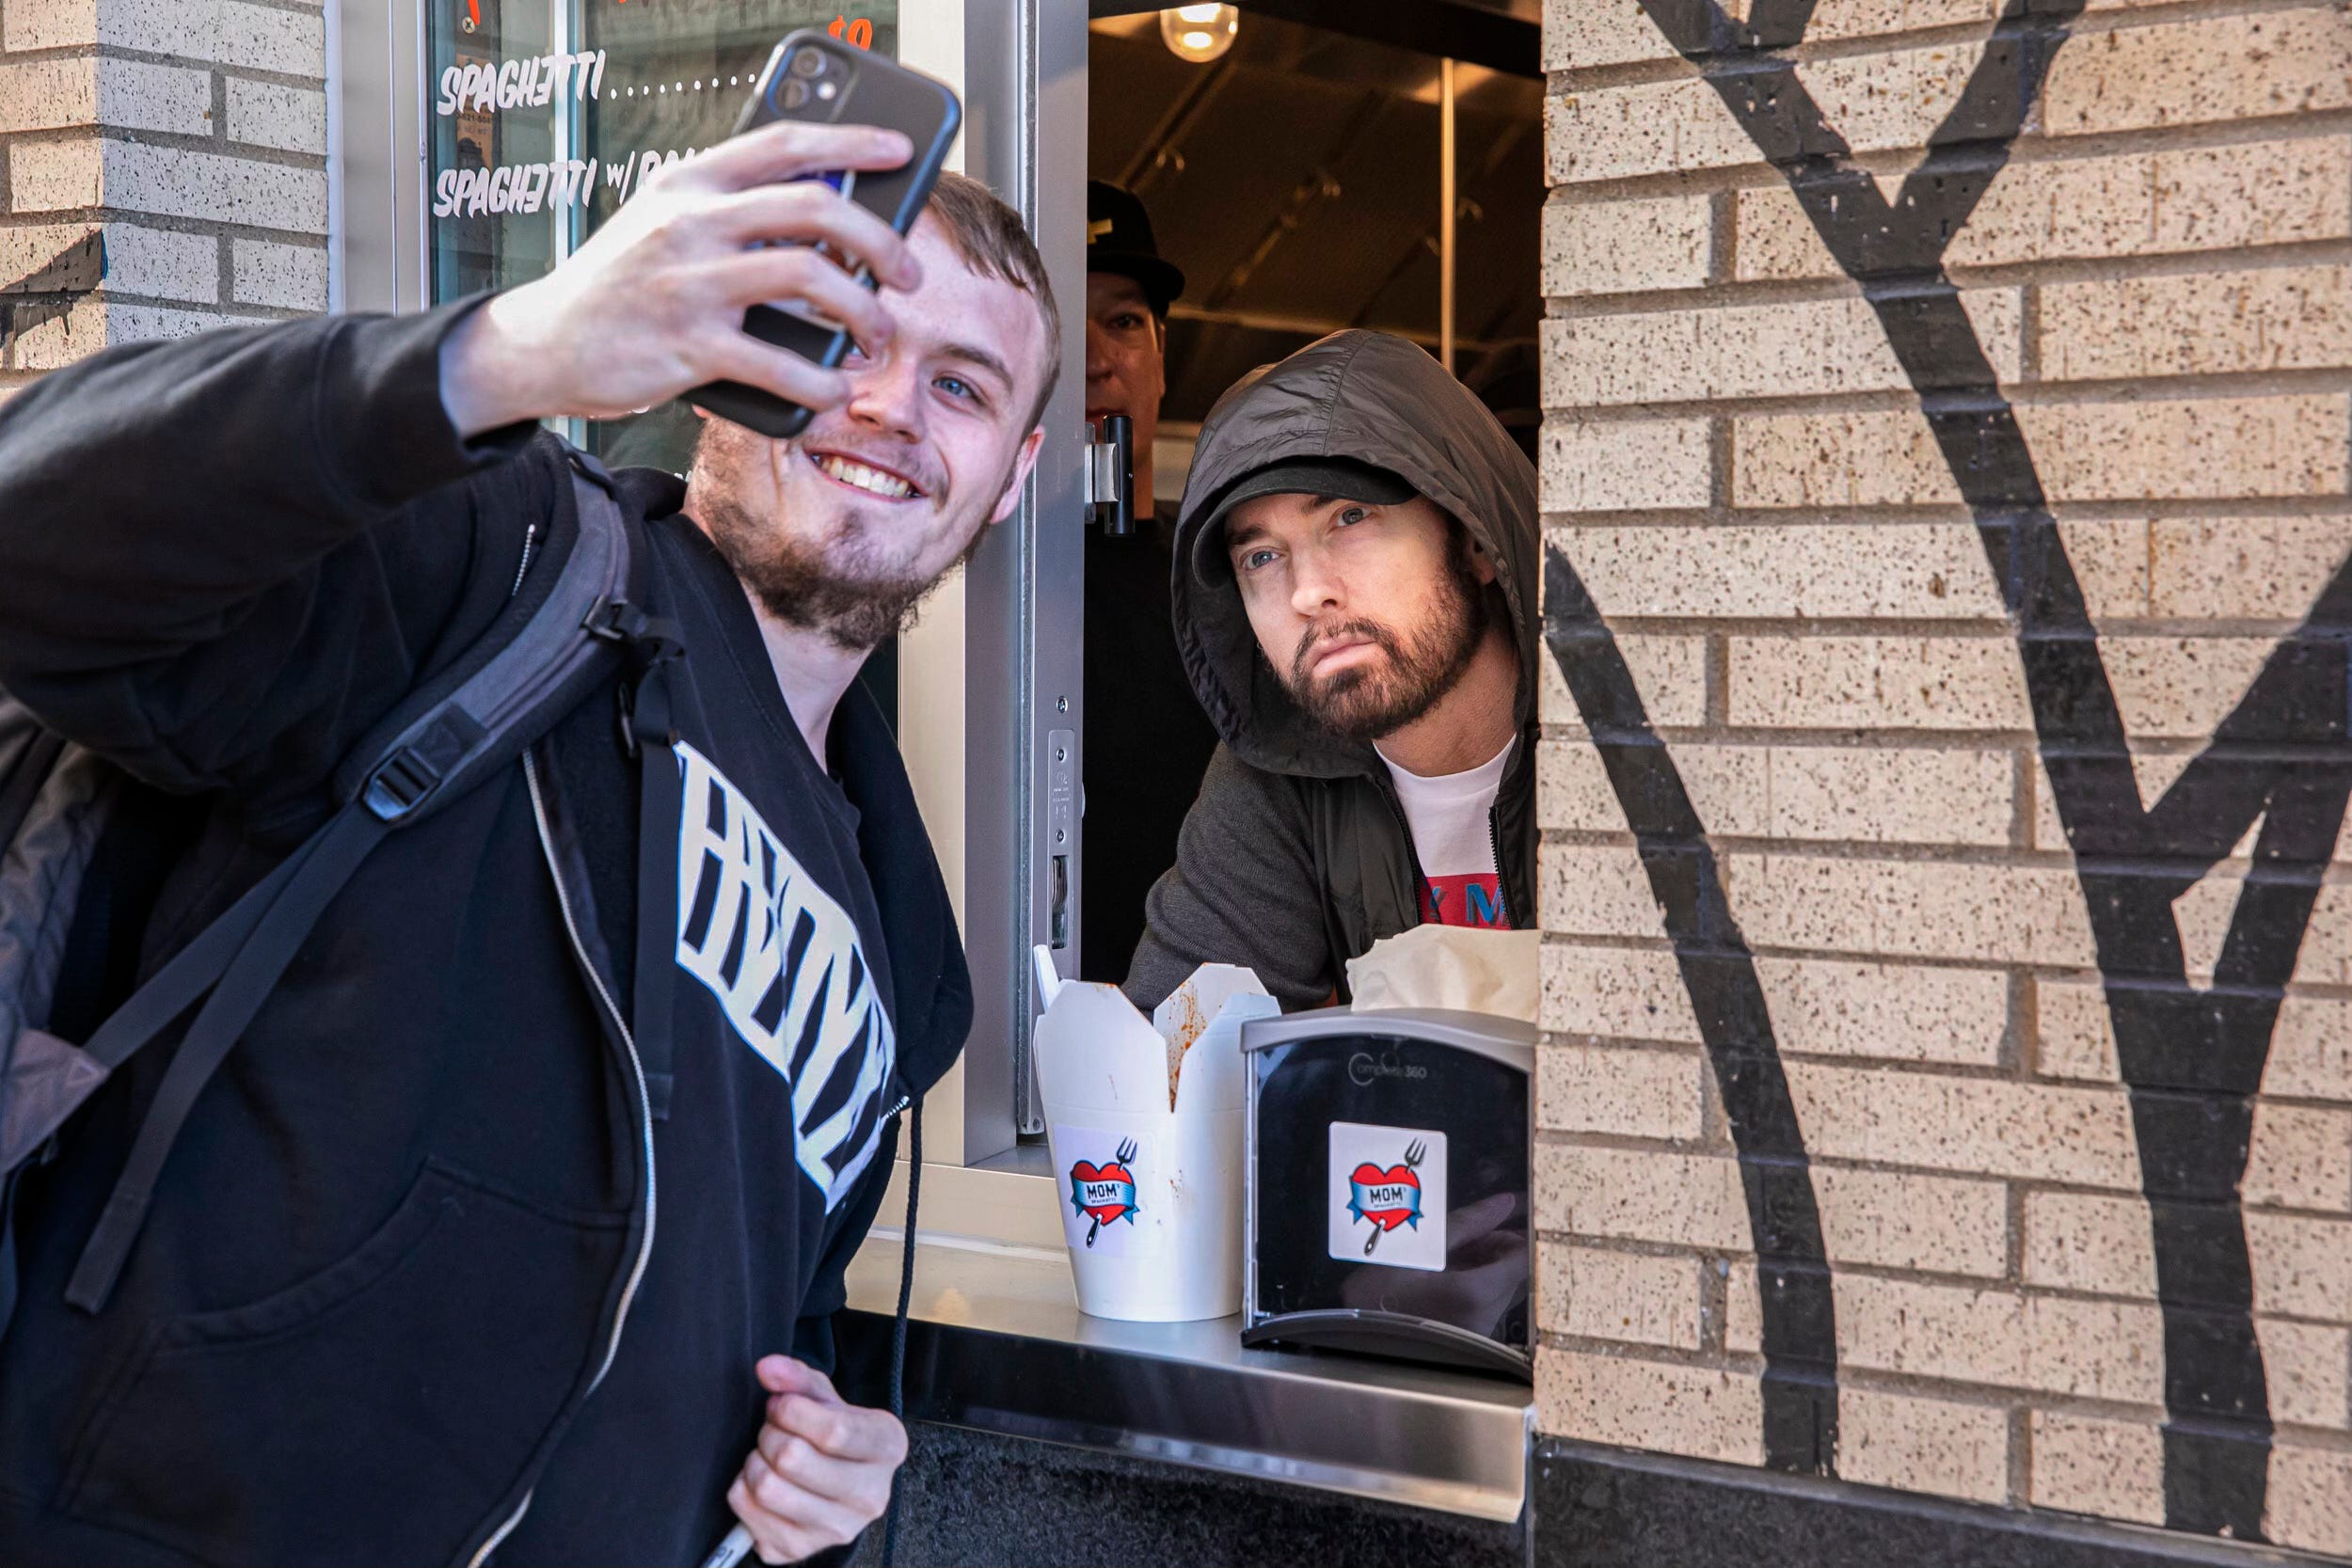 Fan Brendan Linden of the Bronx, New York, takes a selfie with Eminem after buying some Mom’s Spaghetti from the Detroit rapper at the walk-up window of his new restaurant in Detroit on Wednesday, Sept. 29, 2021.